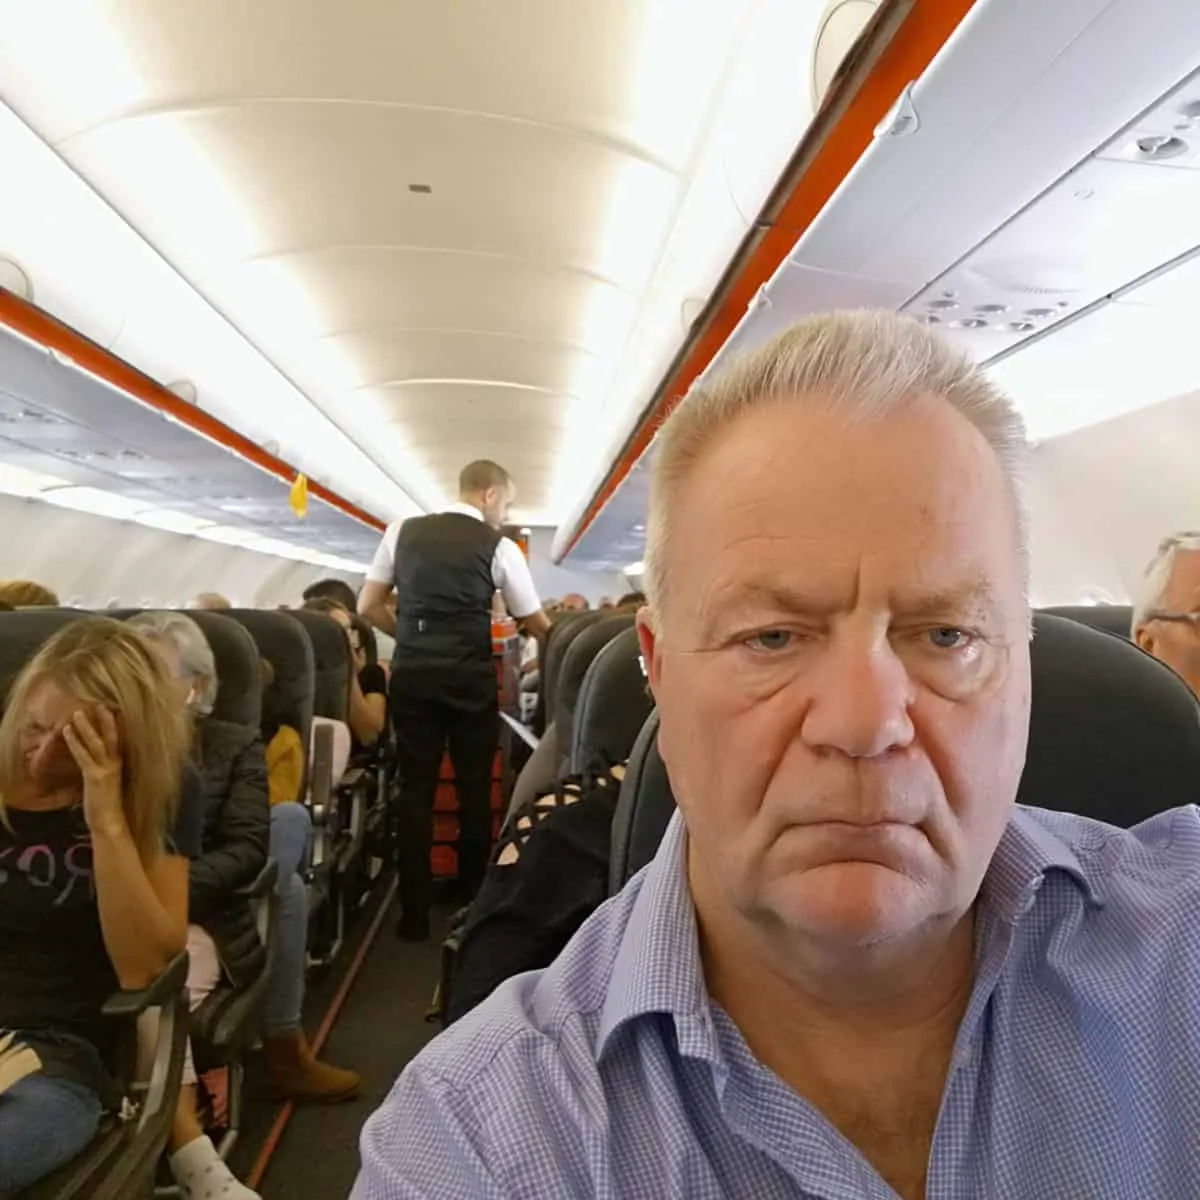 Can You Wear Hearing Aids on a Plane? 2